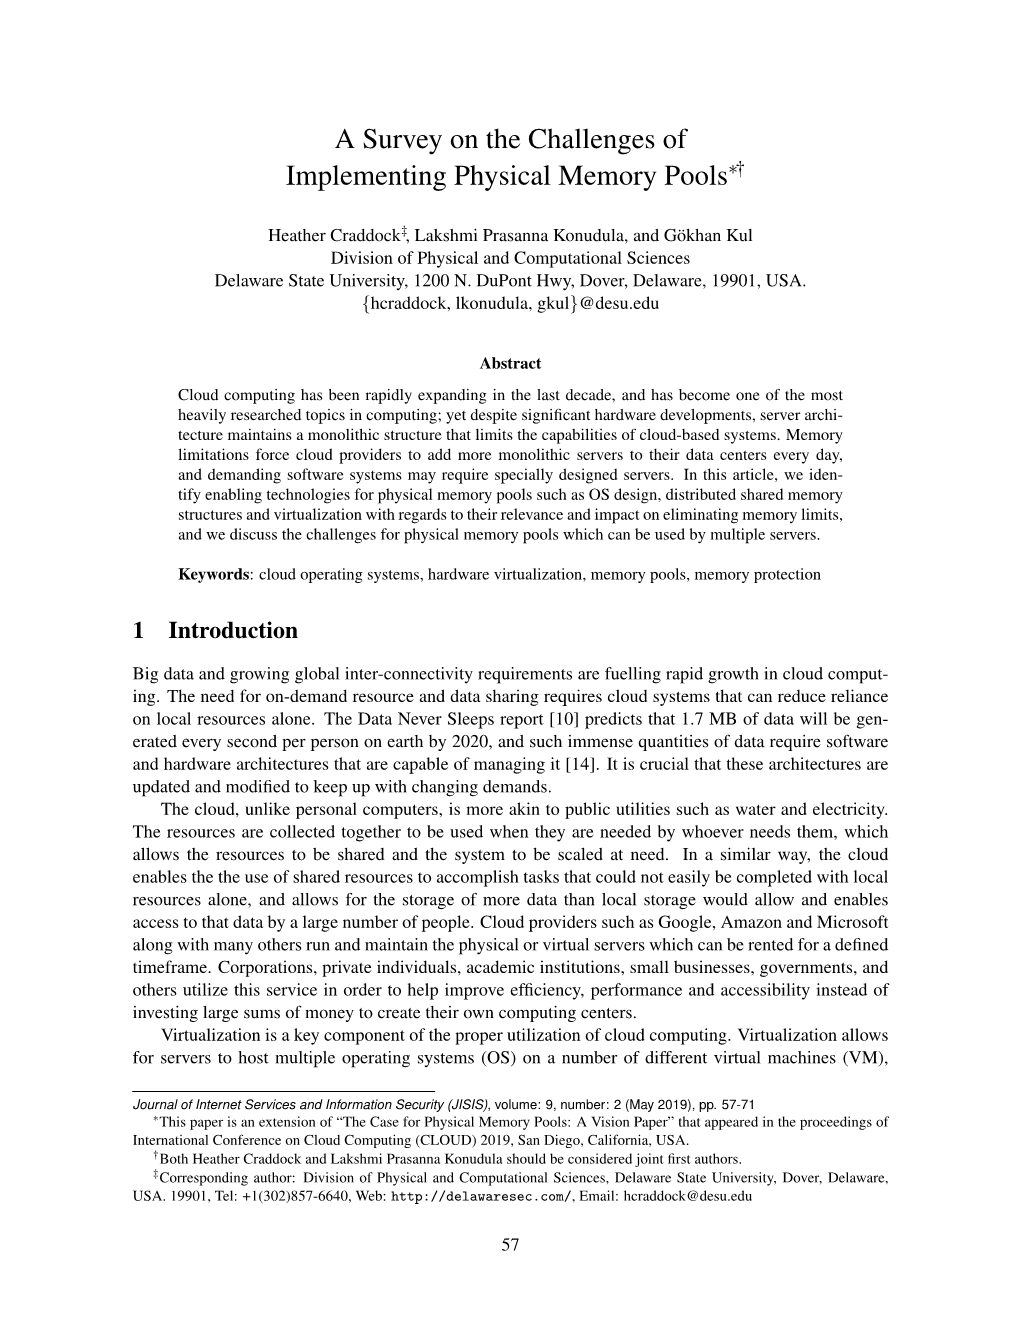 A Survey on the Challenges of Implementing Physical Memory Pools∗†